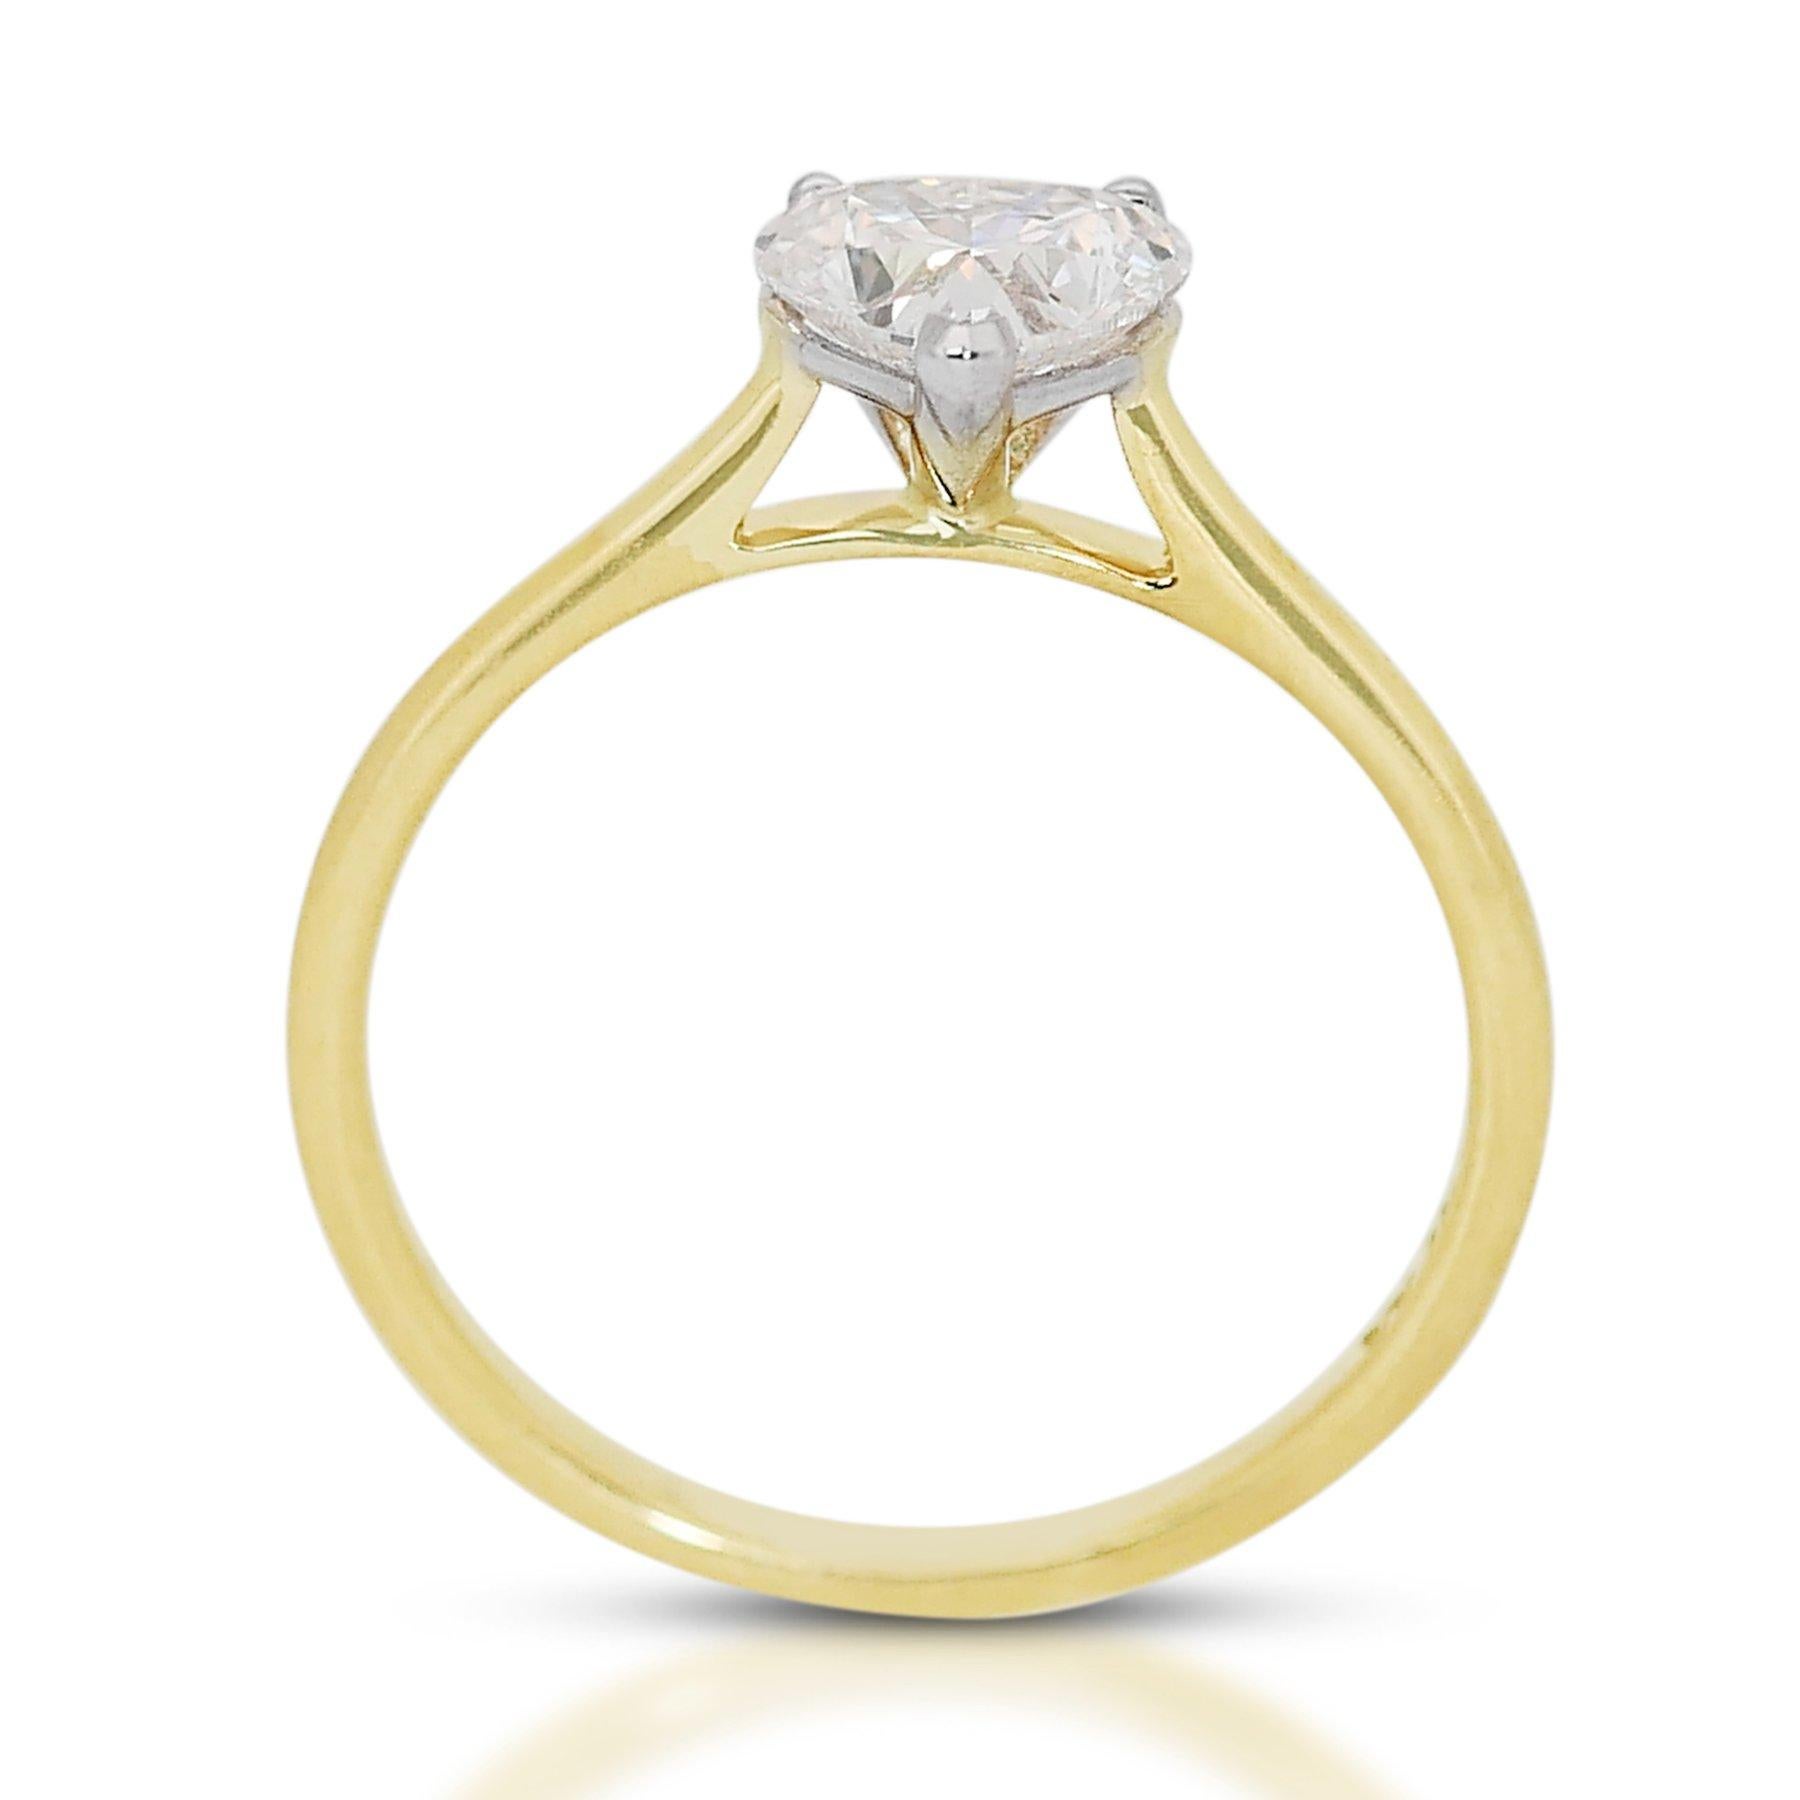 Charming 0.75 ct Heart-Shaped Diamond Solitaire Ring in 18k Yellow Gold – GIA Certified

Celebrate love and romance with this enchanting 0.75-carat heart-shaped diamond solitaire ring, meticulously crafted in rich 18k yellow gold. This piece